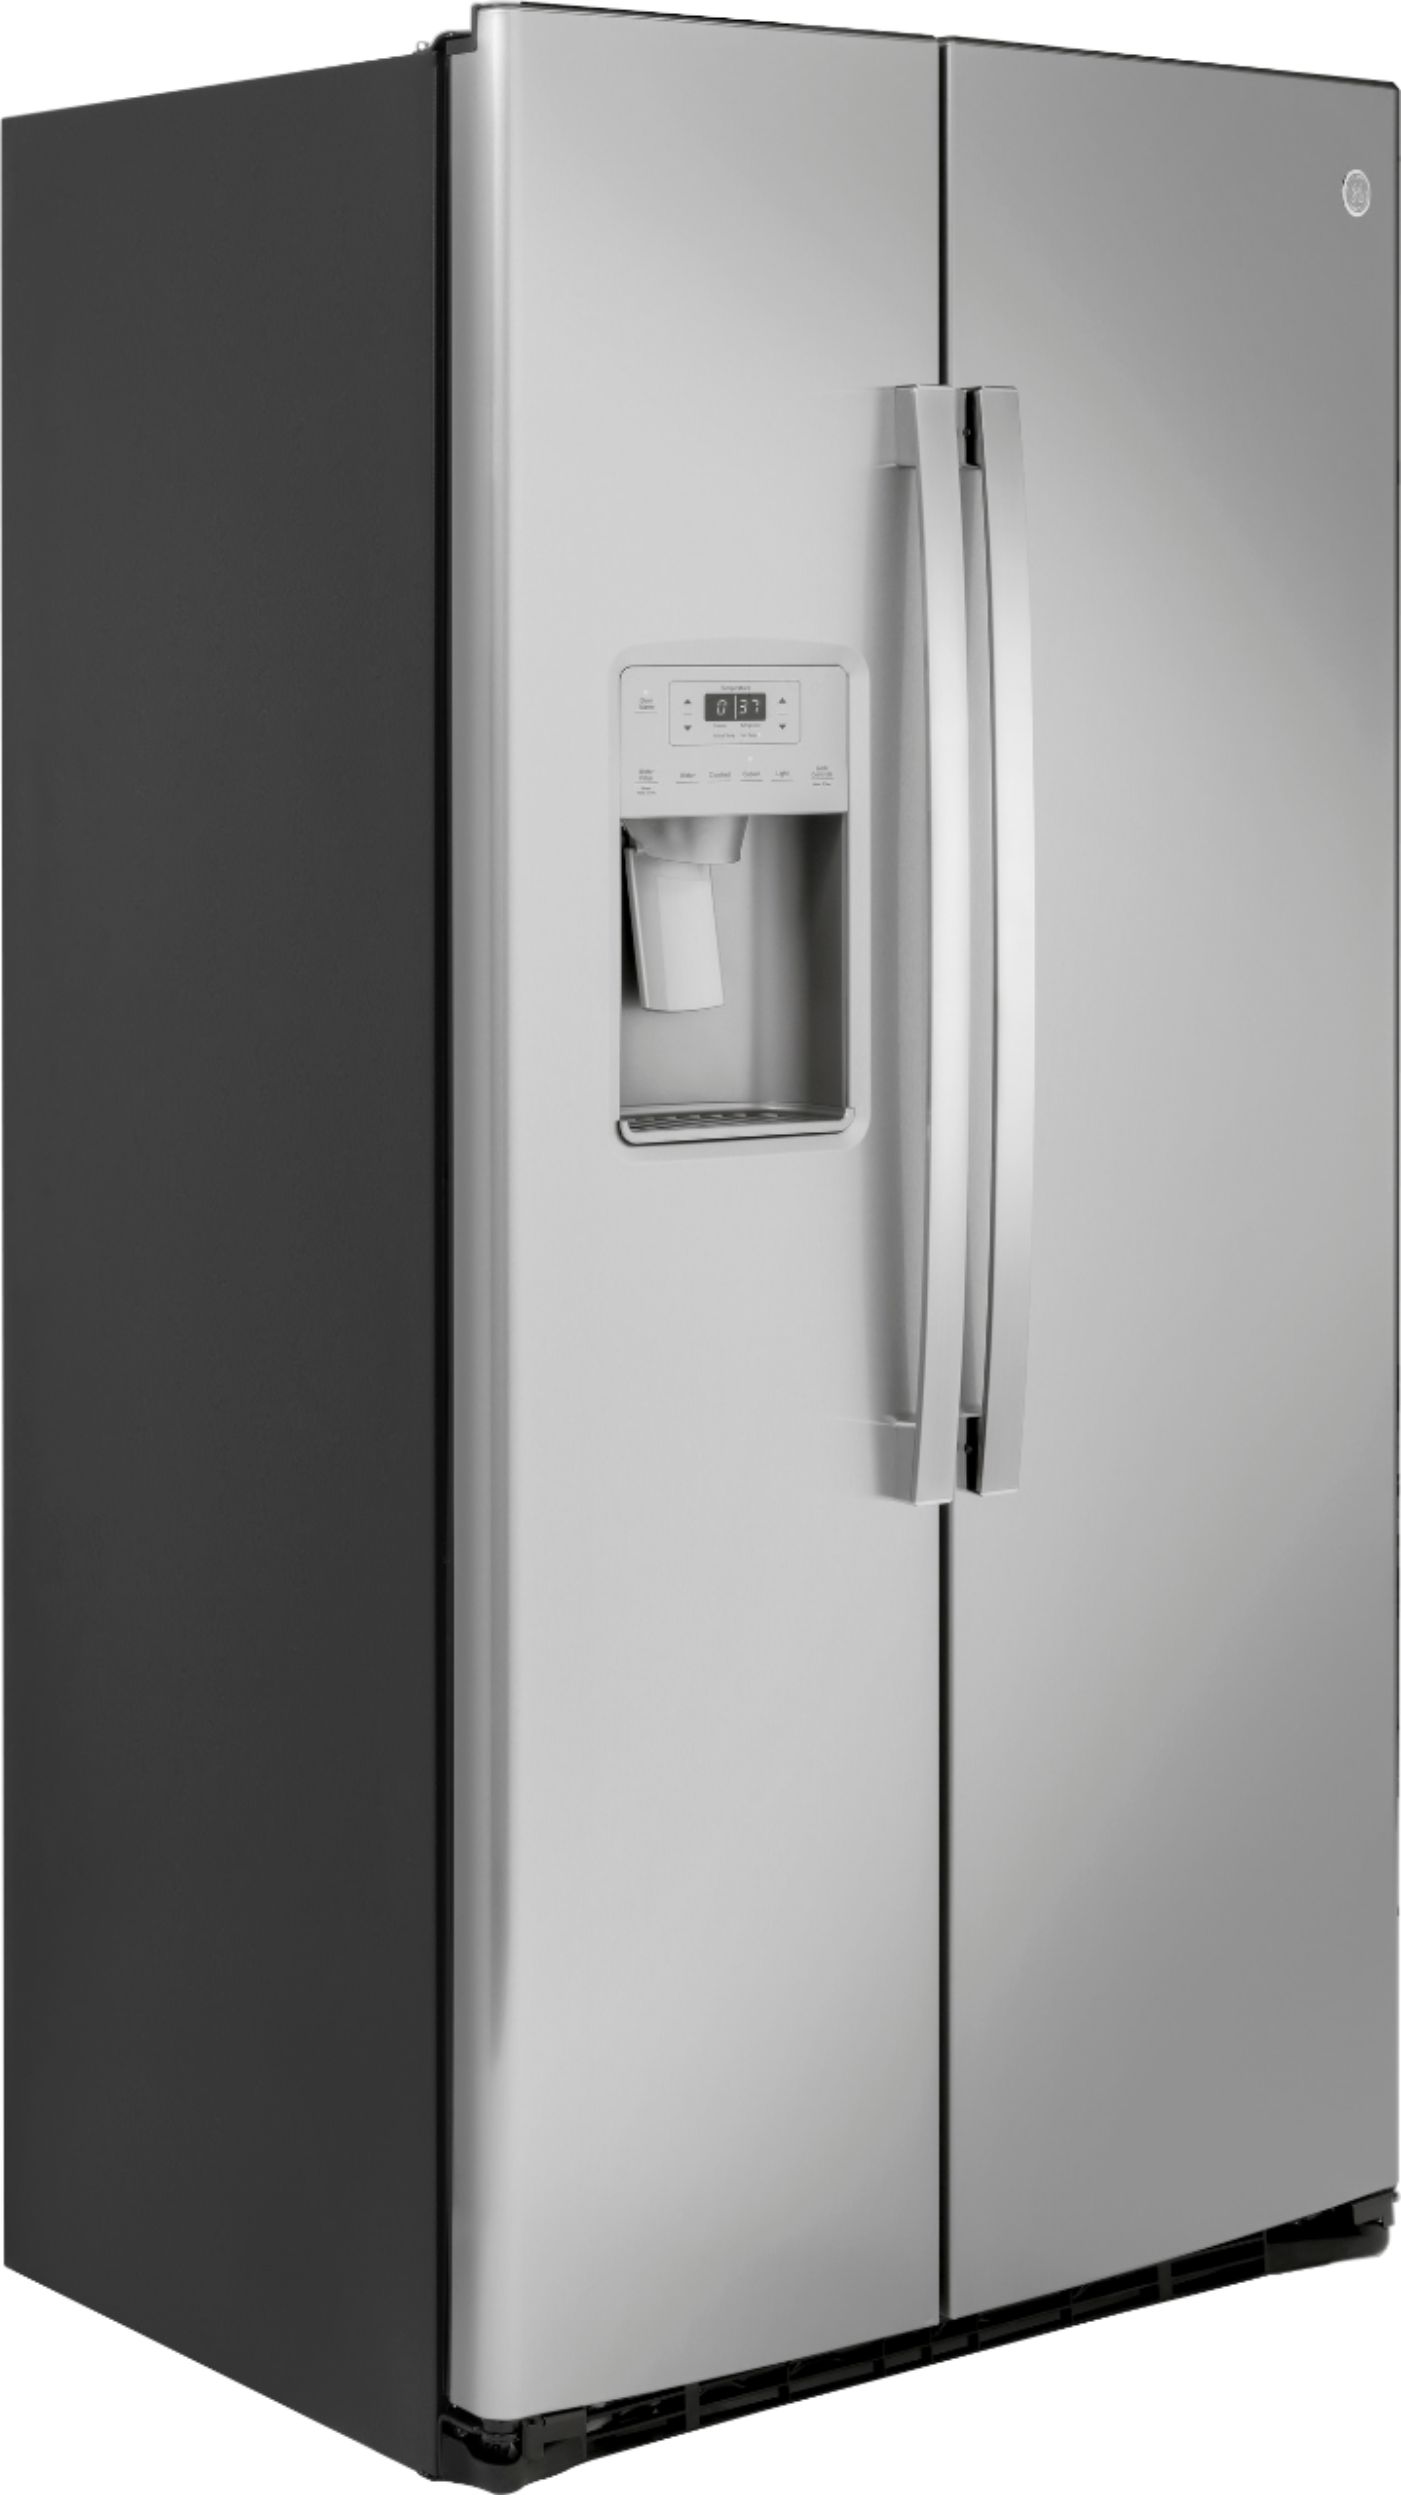 Angle View: GE - 23.2 Cu. Ft. Side-by-Side Refrigerator with Thru-the-Door Ice and Water - Stainless steel